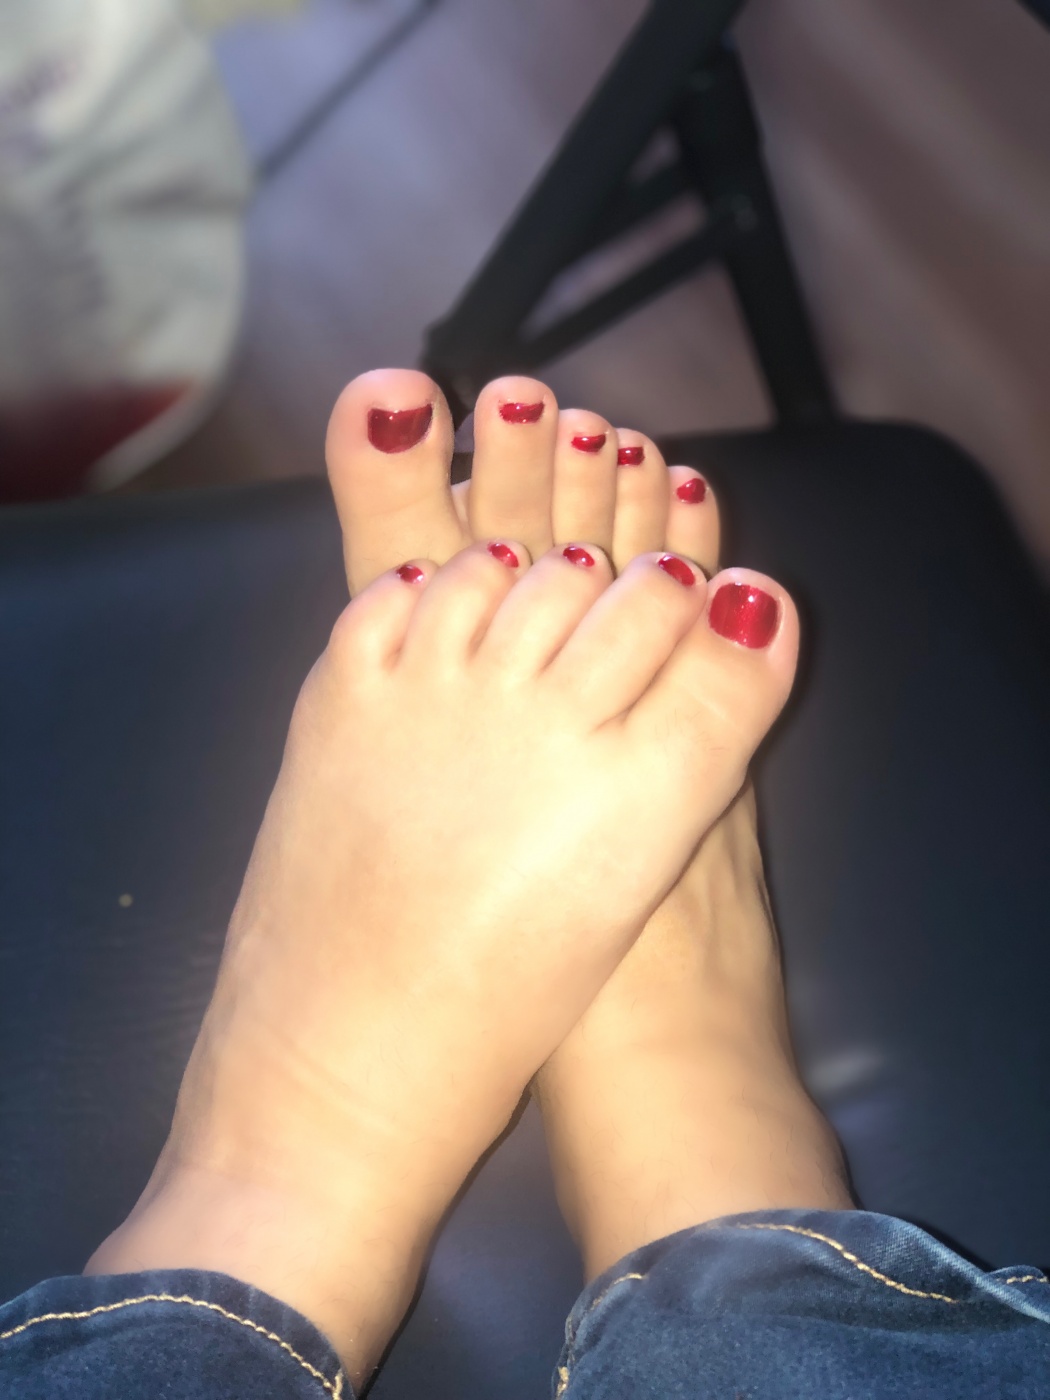 Photo Of Cute Feet With Red Nail Poli